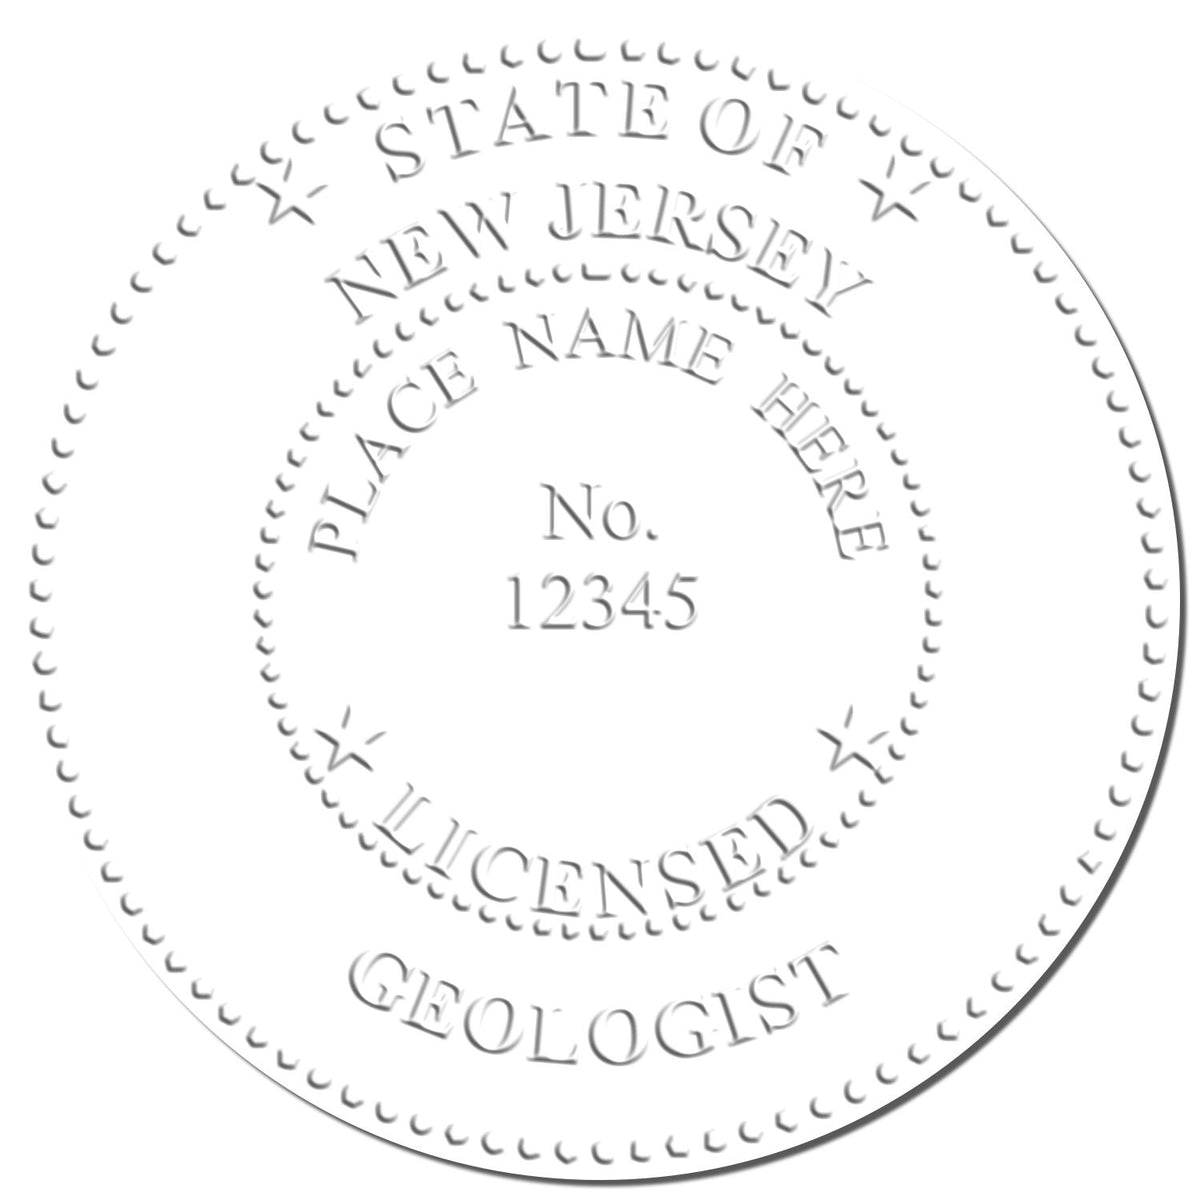 The New Jersey Geologist Desk Seal stamp impression comes to life with a crisp, detailed image stamped on paper - showcasing true professional quality.